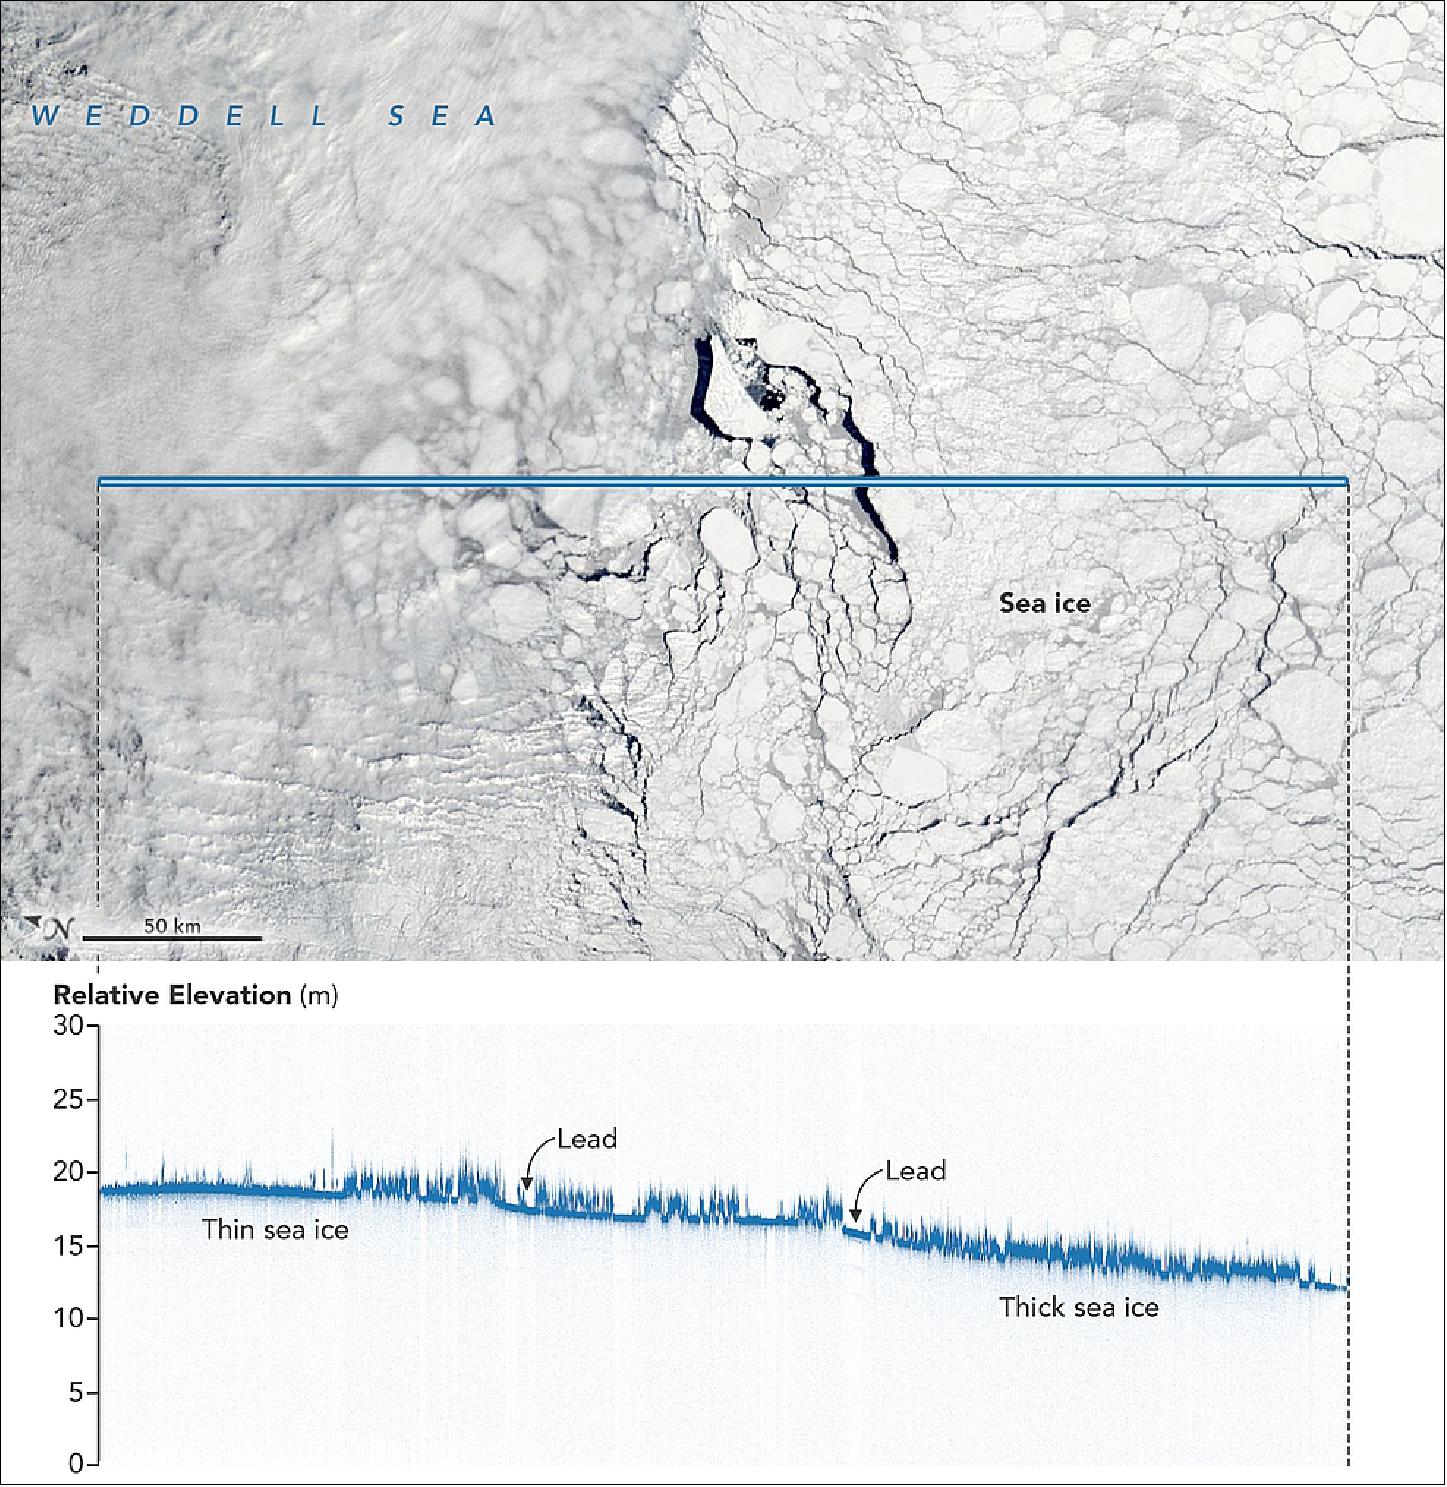 Figure 52: Sea ice of different thickness and bumpiness is broken up by the cracks between floes, called leads, in this graph of photon returns from ICESat-2 as it orbits over the Weddell Sea in Antarctica (image credit: NASA Earth Observatory/Joshua Stevens)